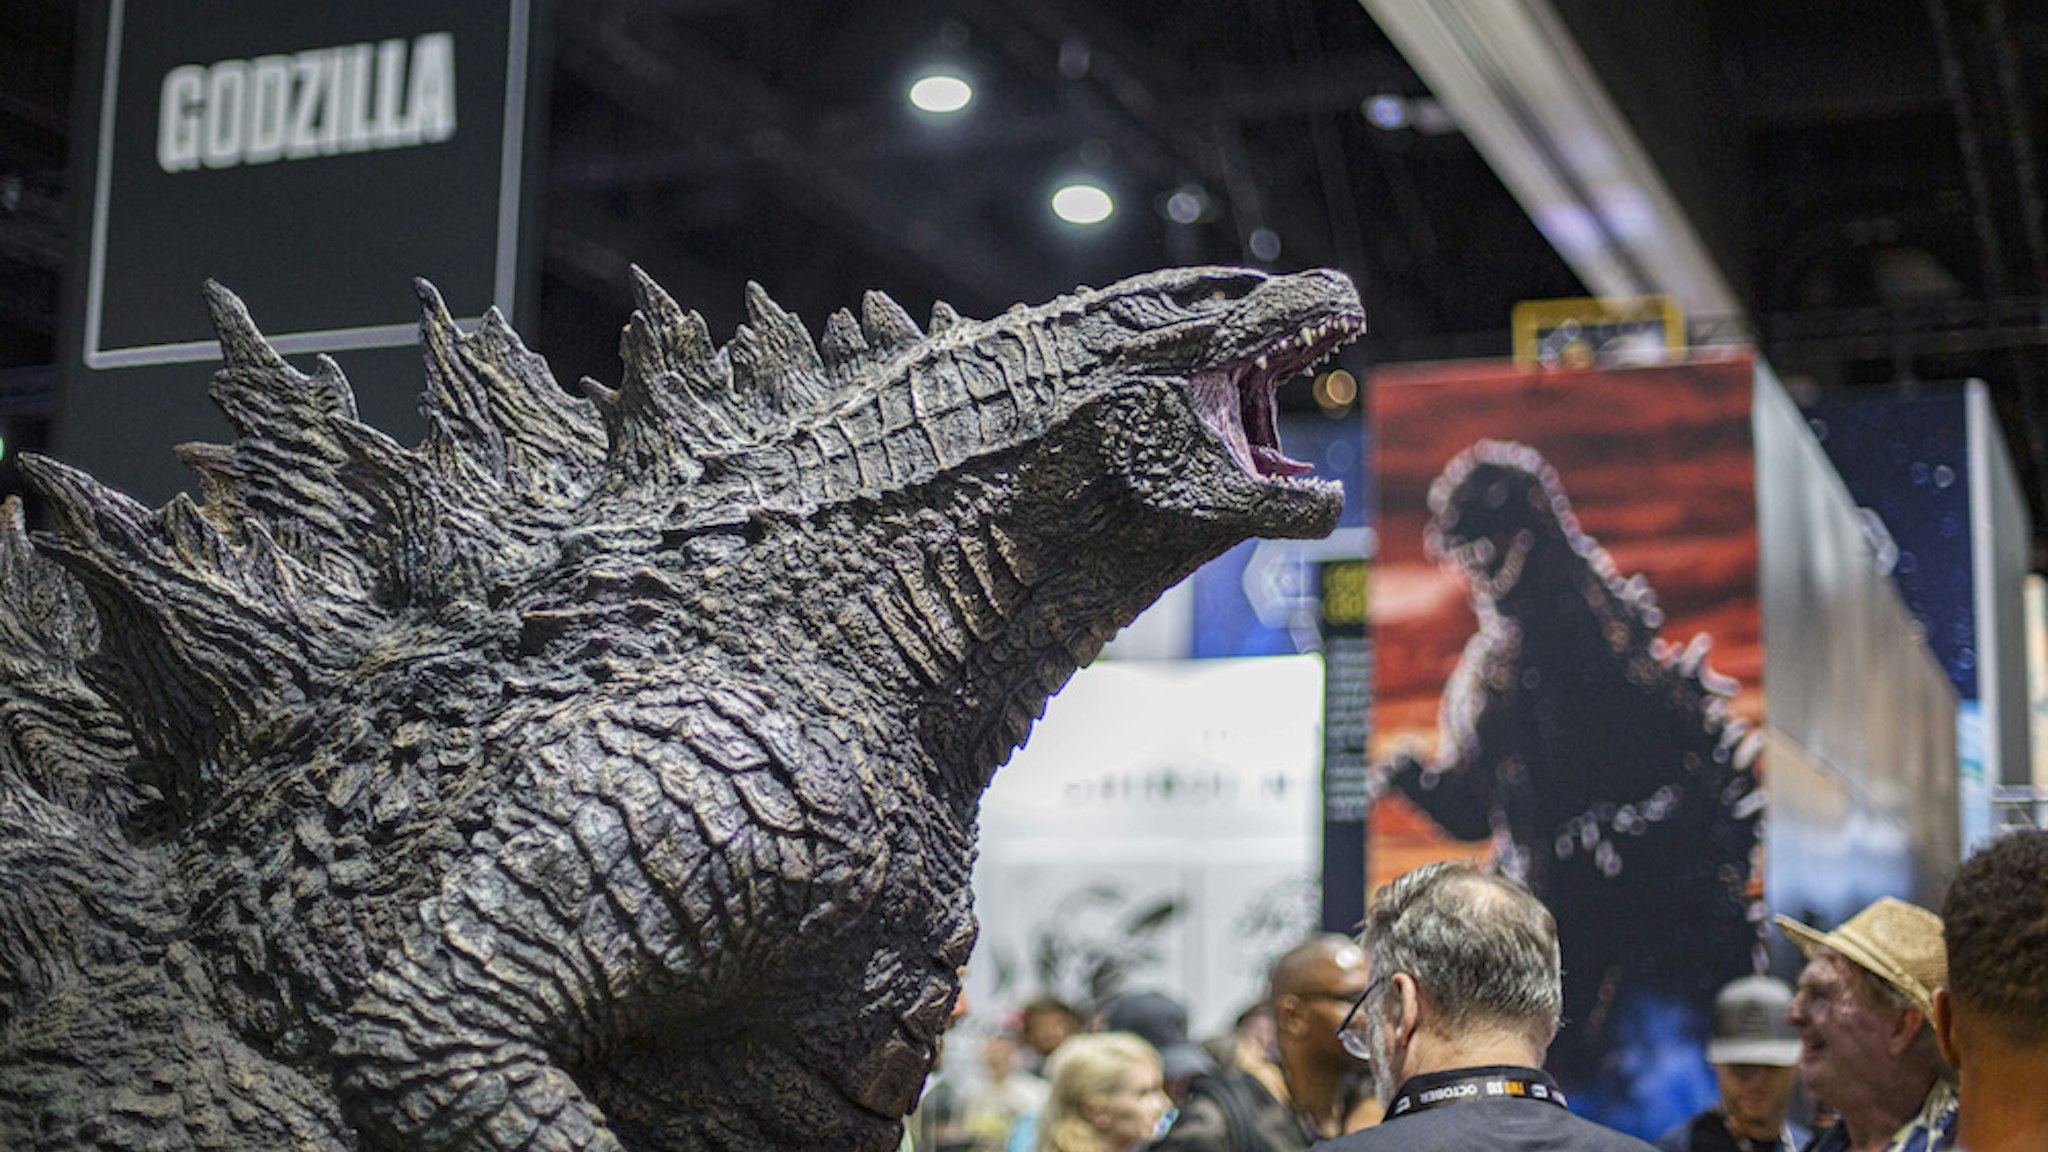 SAN DIEGO, CALIFORNIA - JULY 19: General view of the atmosphere at the Godzilla booth at 2019 Comic-Con International on July 19, 2019 in San Diego, California